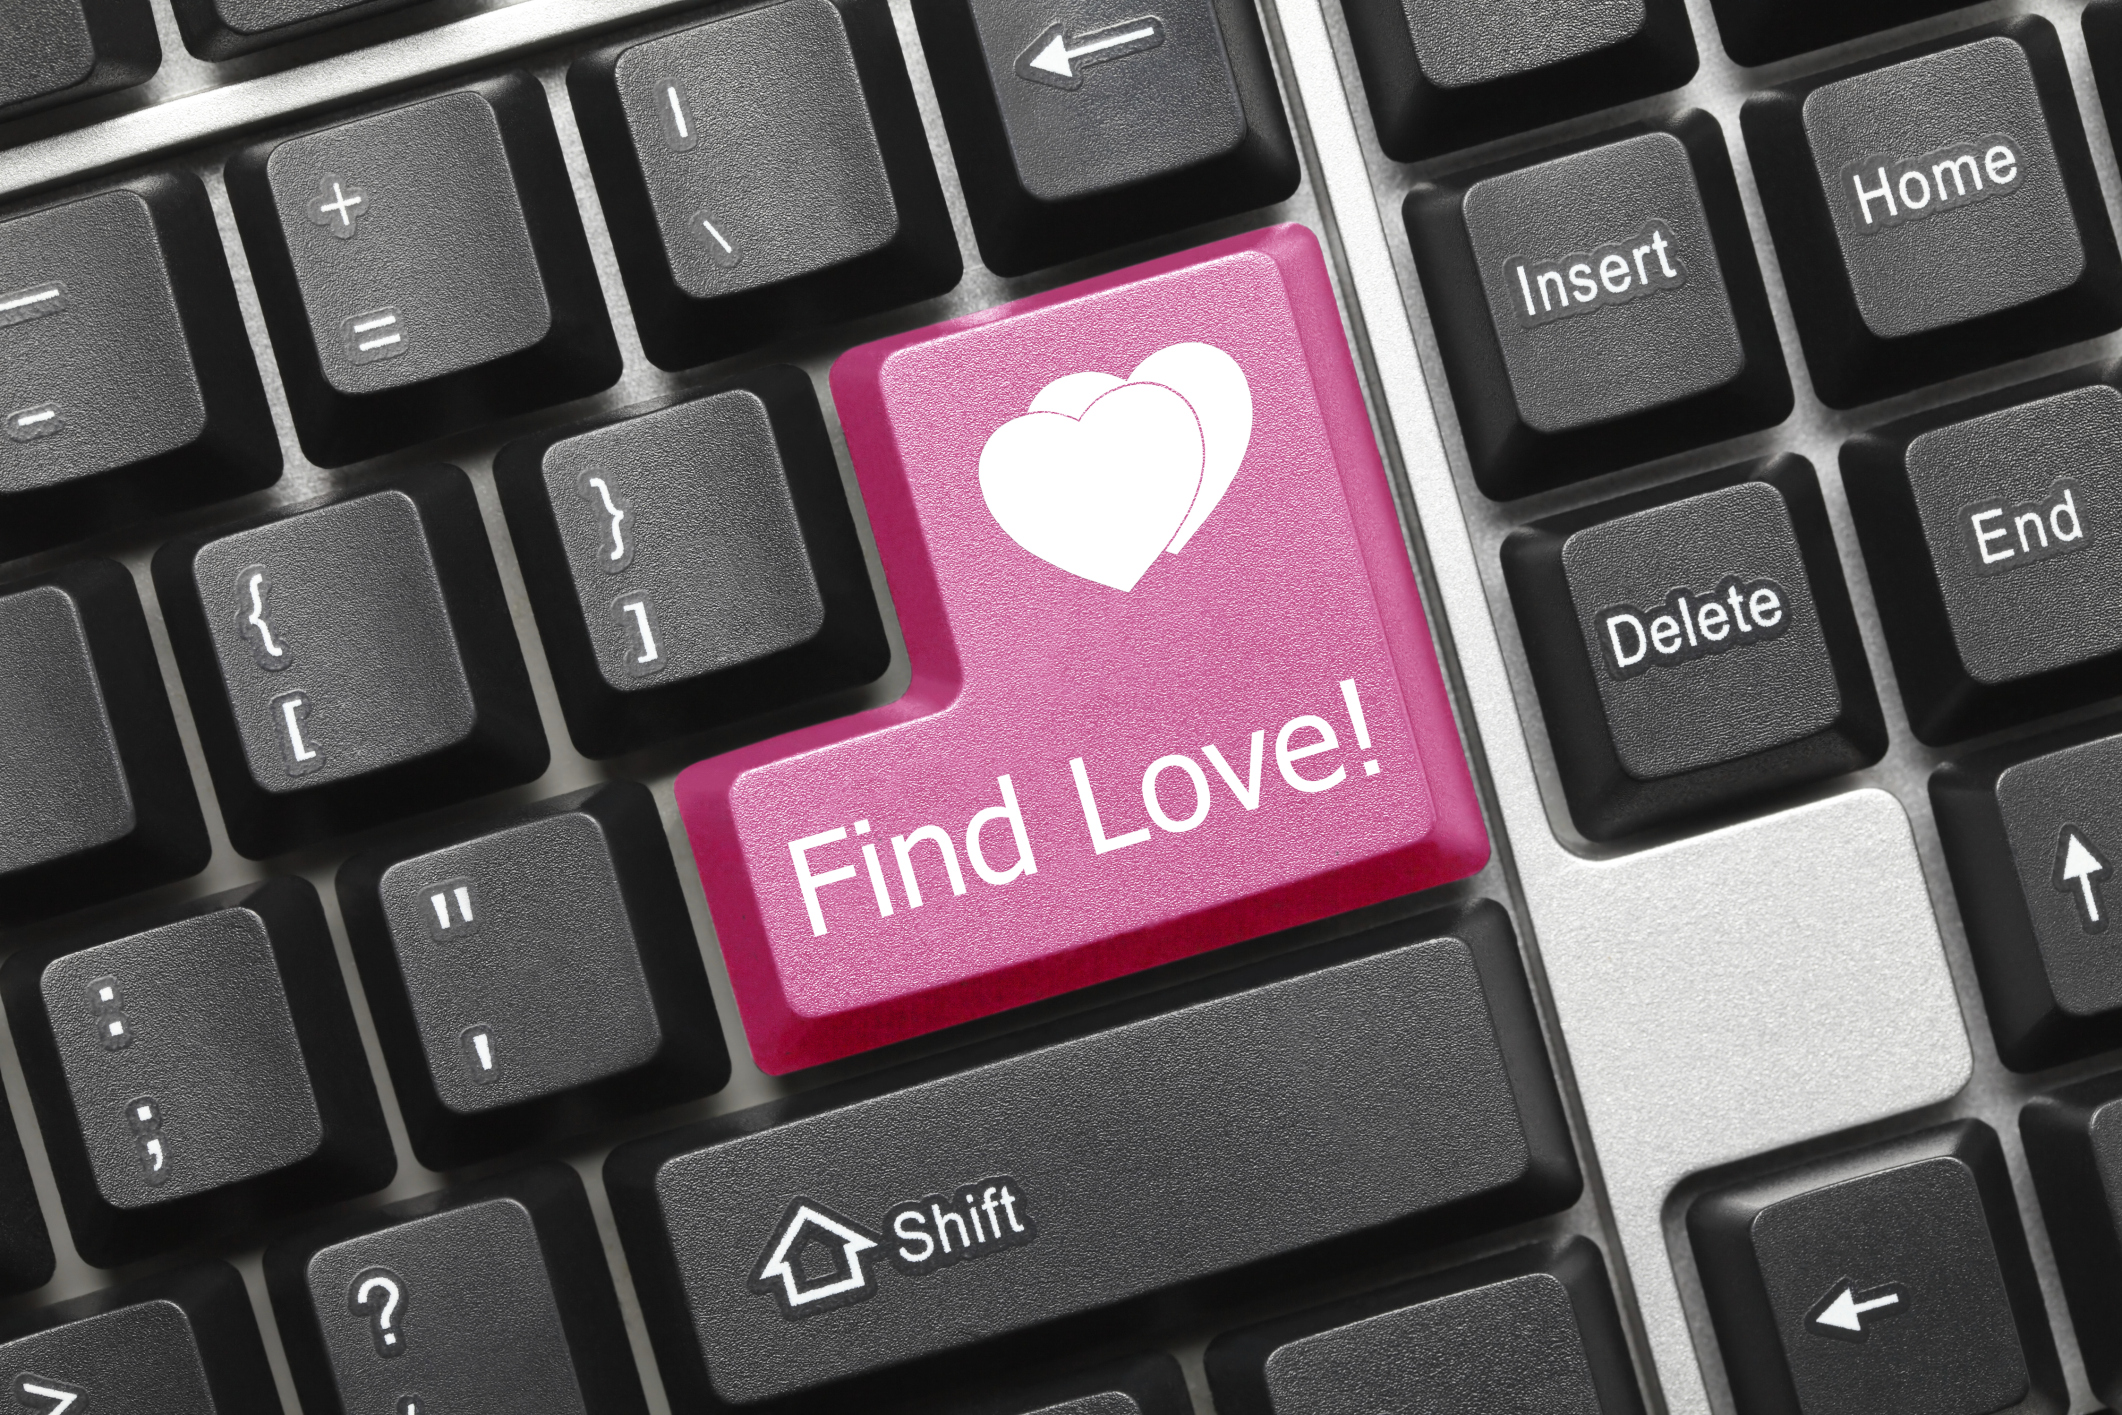 97 Online Dating Questions to Get the Conversation Started